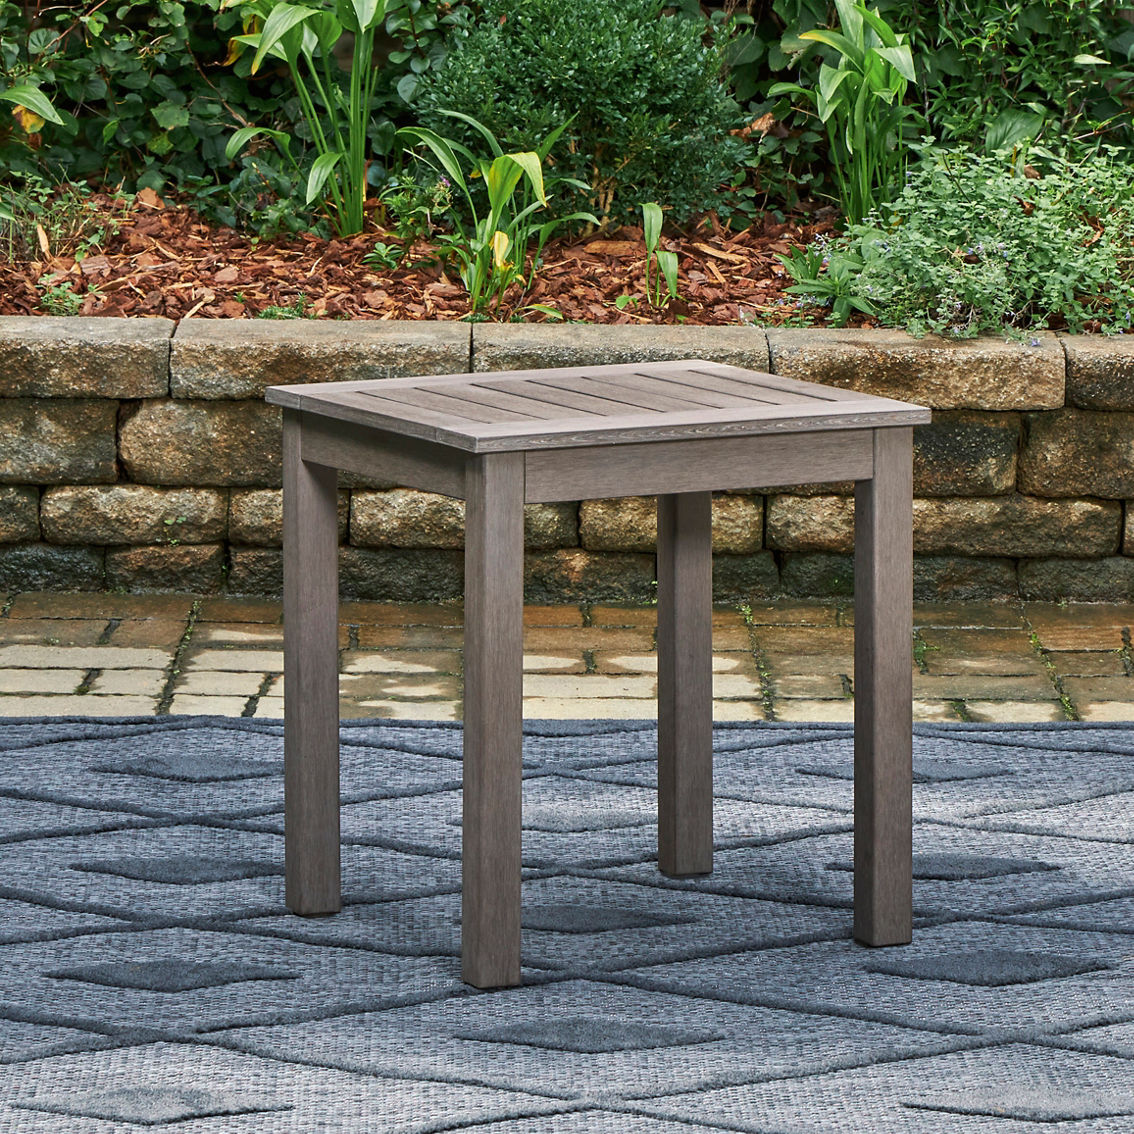 Signature Design by Ashley Hillside Barn Outdoor End Table - Image 4 of 5